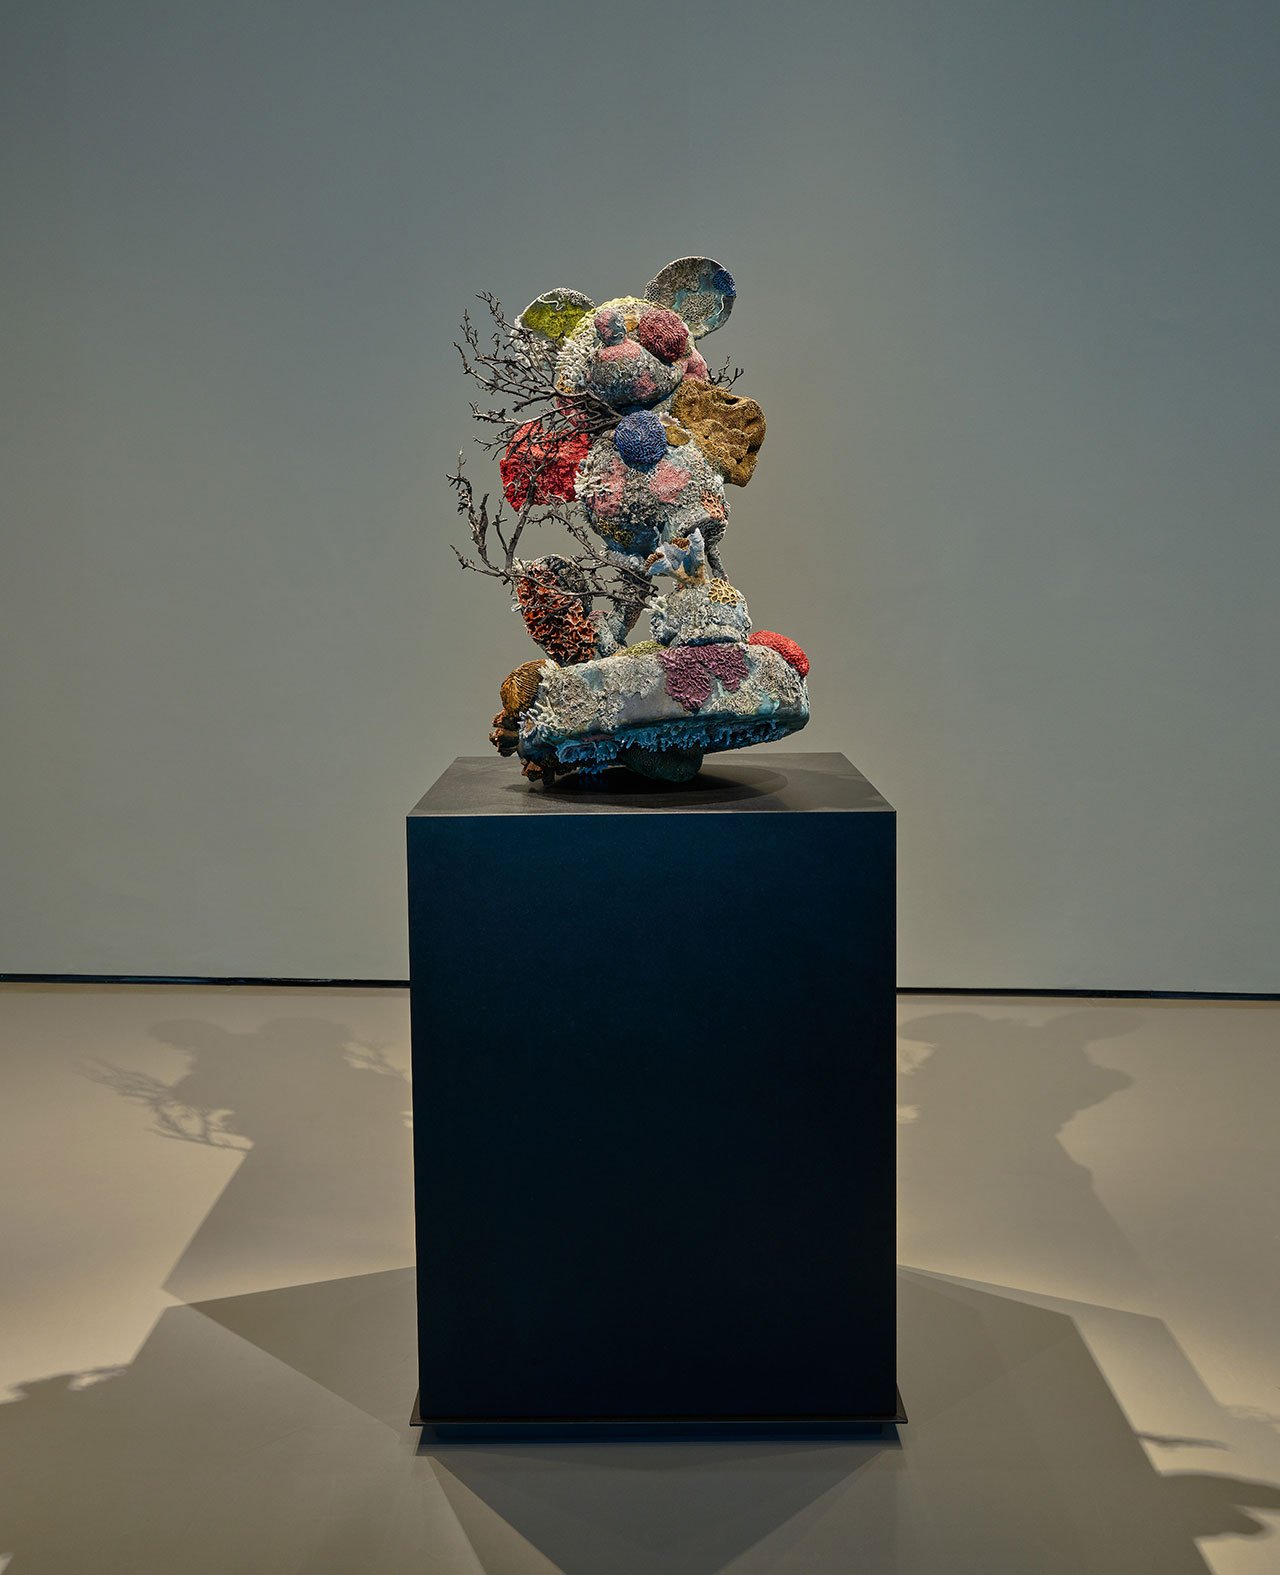 Damien Hirst, Mickey. Photographed by Prudence Cuming Associates © Damien Hirst and Science Ltd. All rights reserved, DACS 2017.